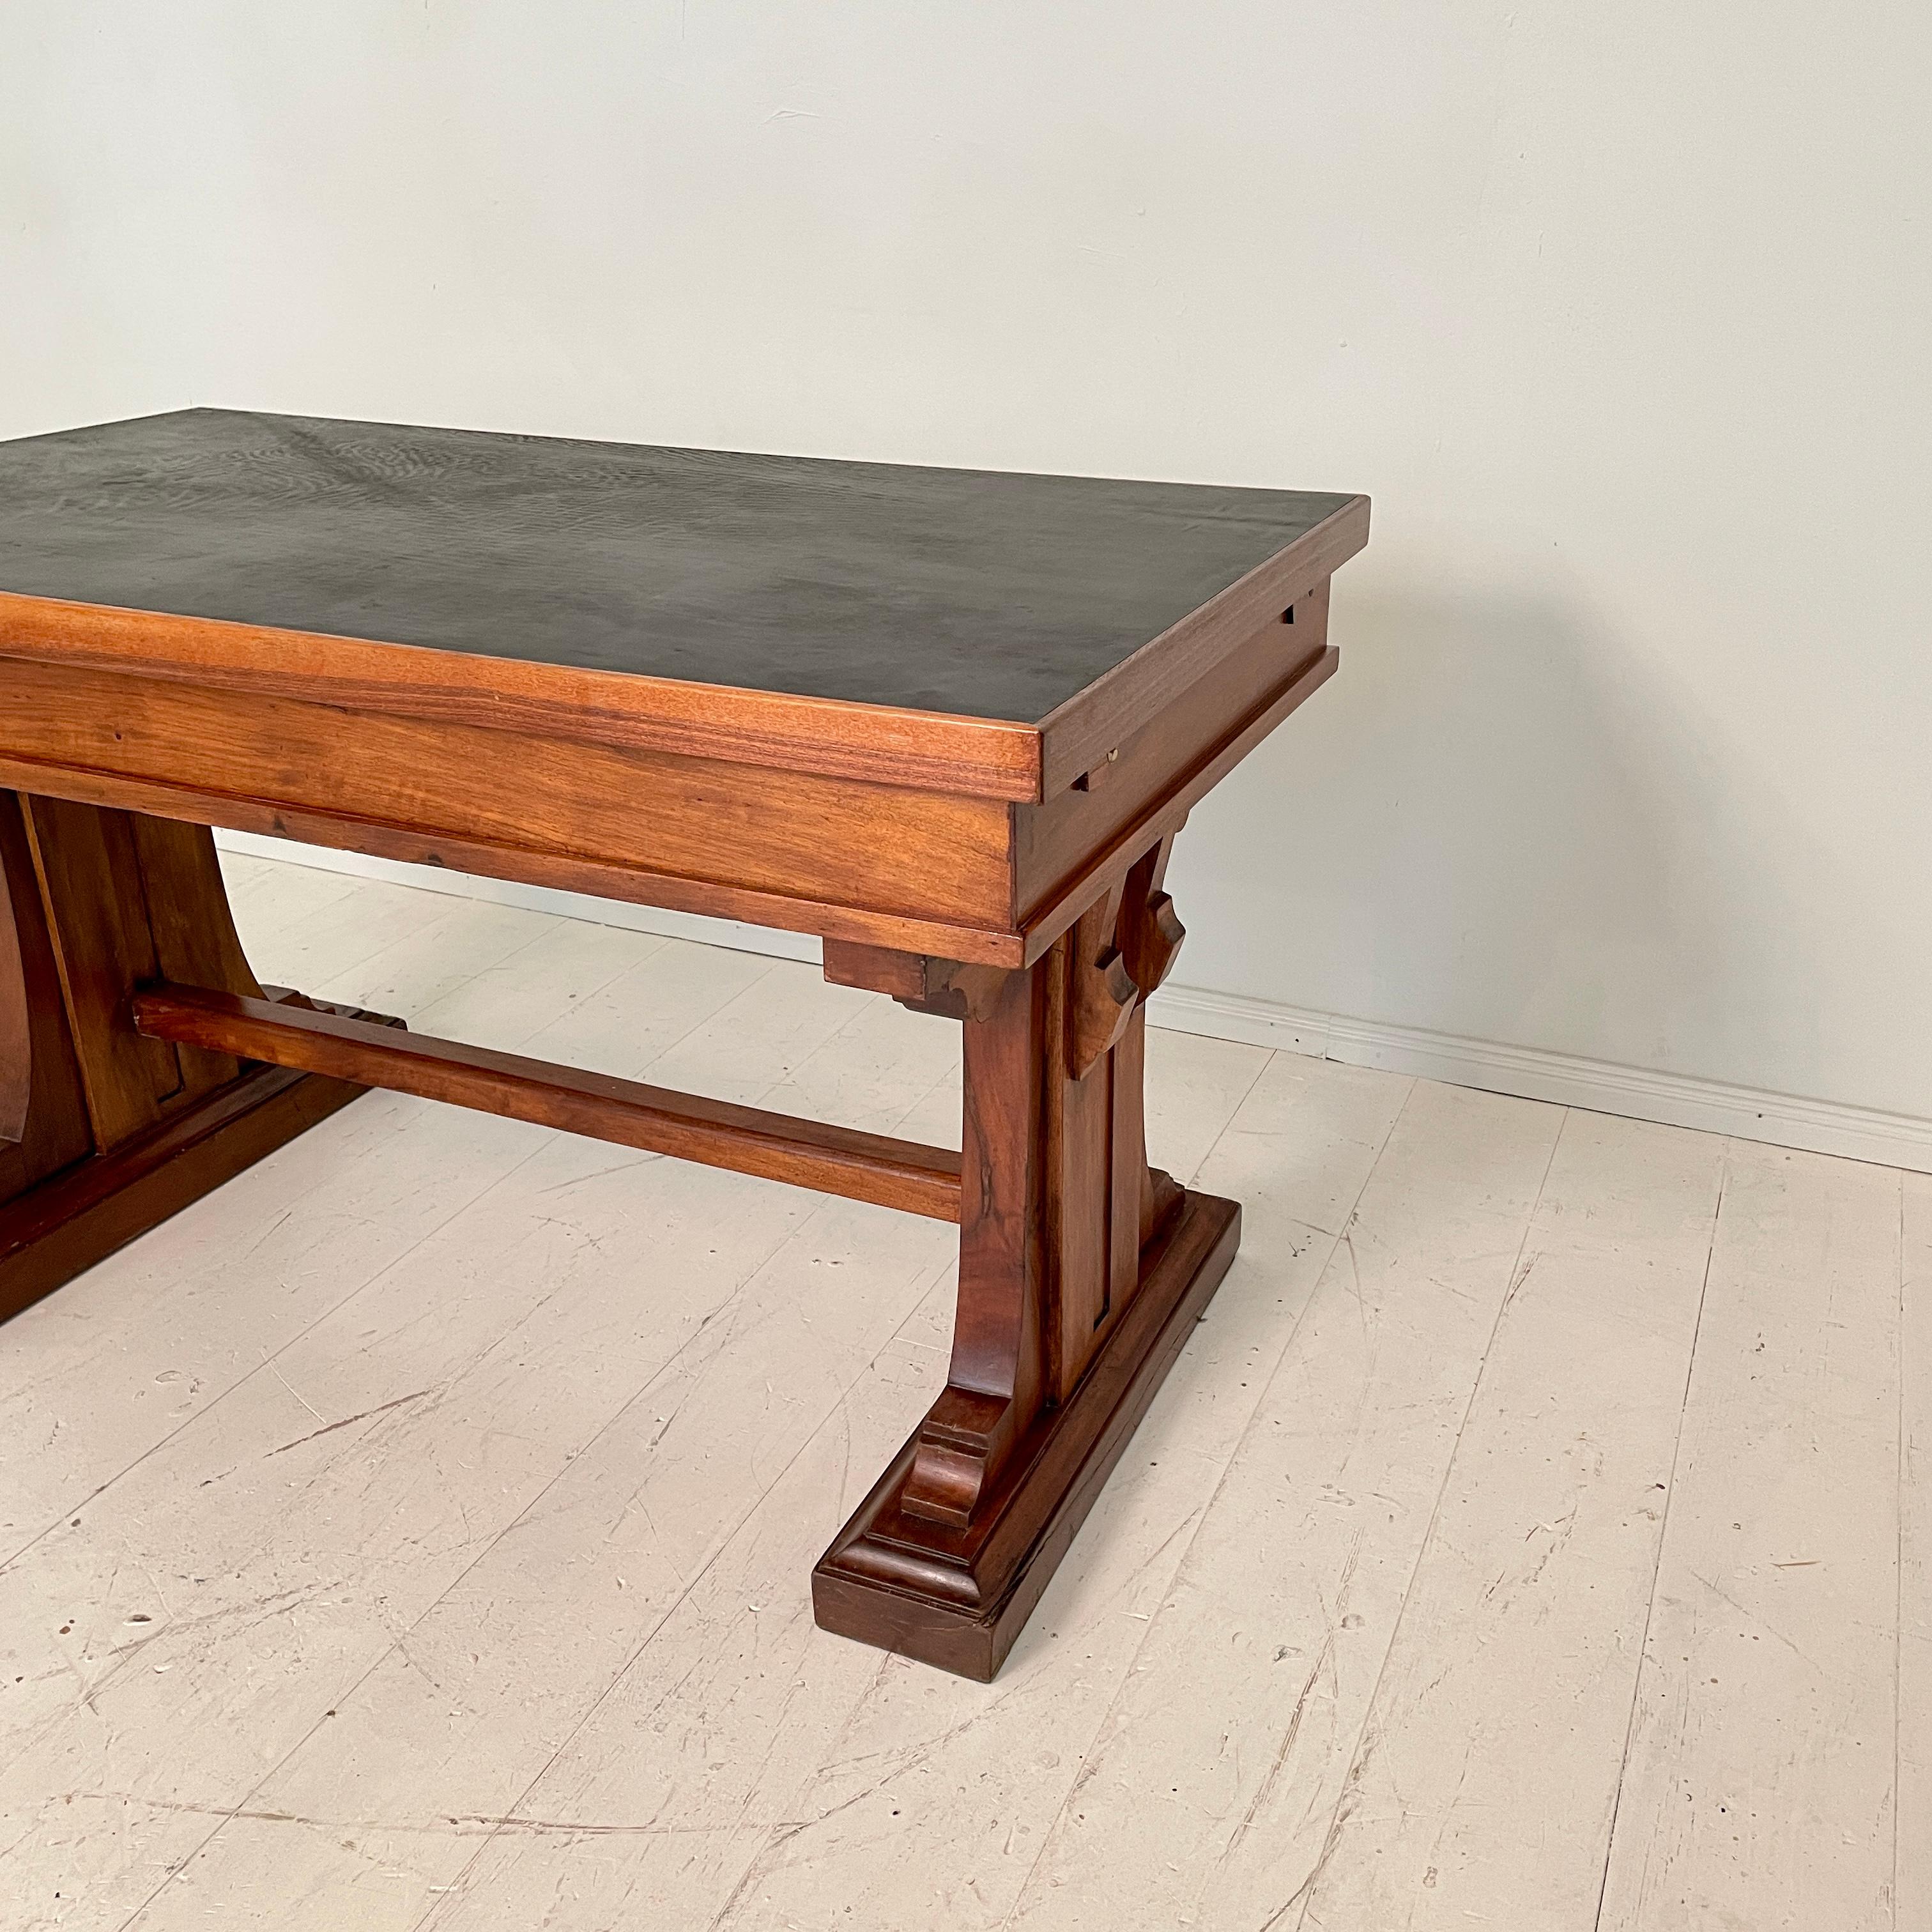 Italian Art Deco Desk or Writing Table in Walnut and Black Leather Top, 1920s 1